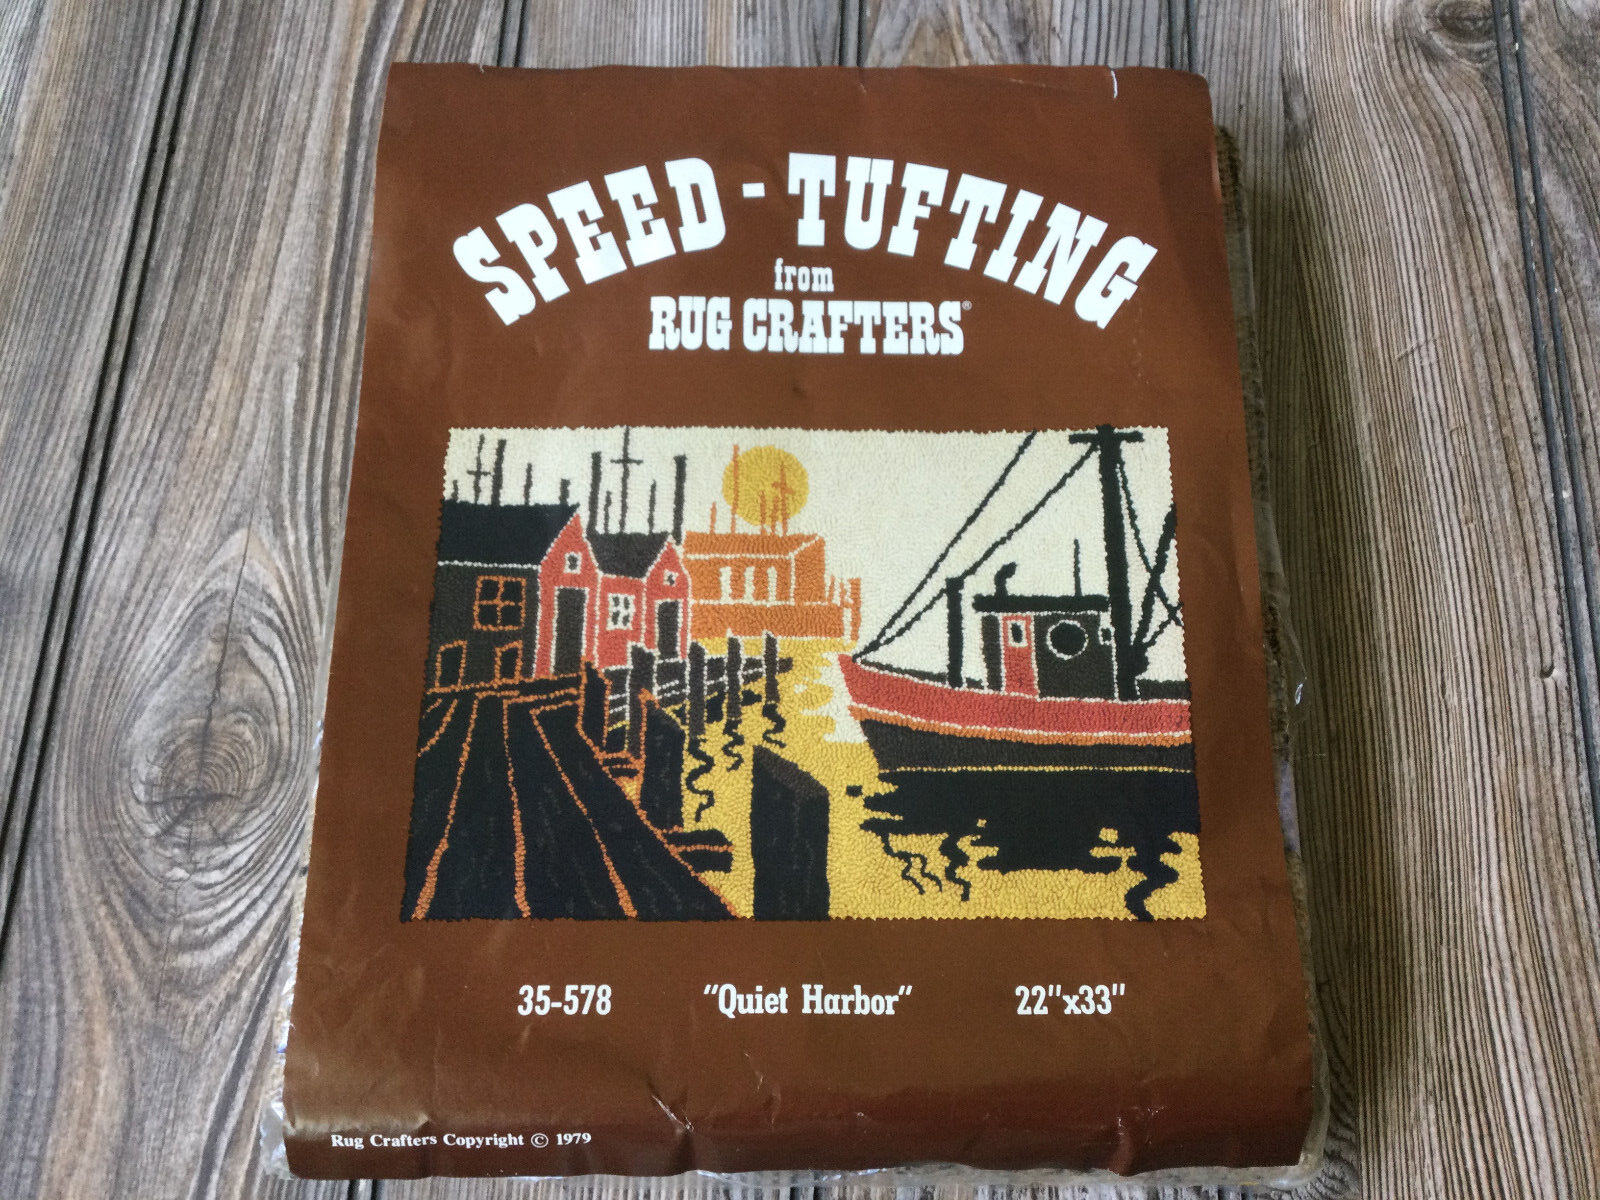 1979 Rug Crafters Speed Tufting Pattern 35-578 "Quiet Harbor" (22" x 33") NEW - $54.70